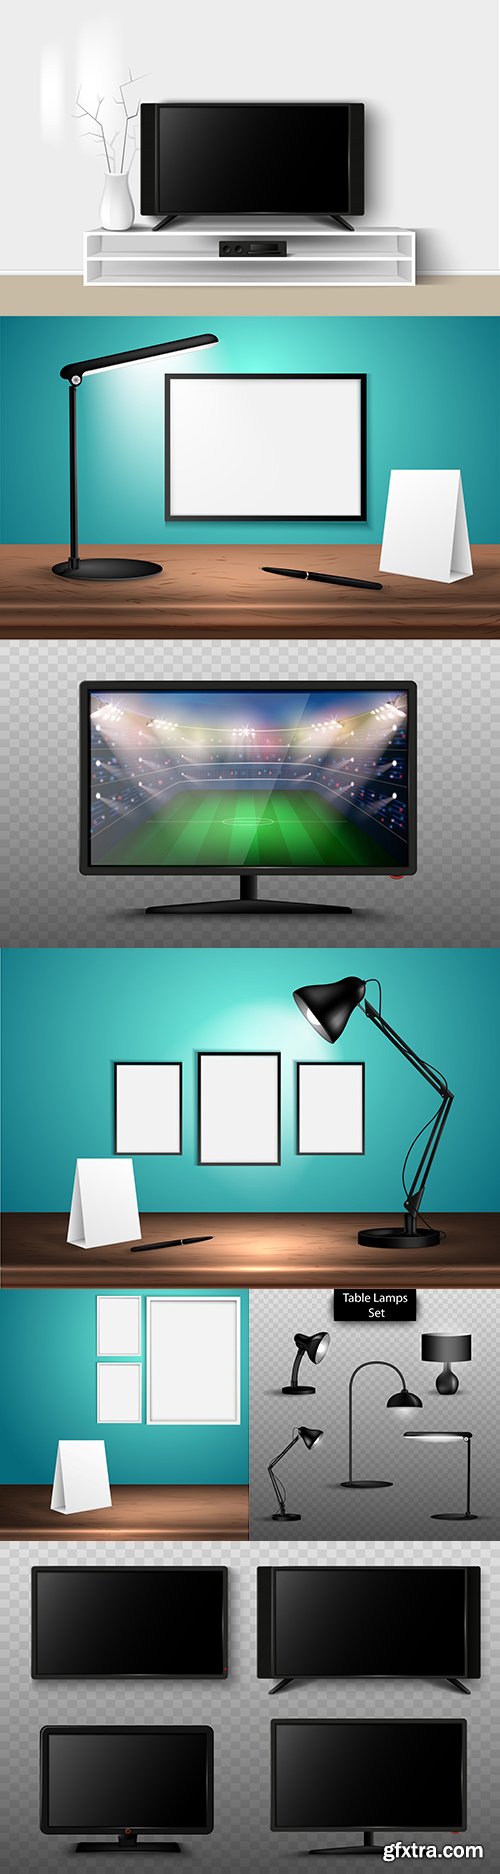 Table lamp and TV on wooden table 3d illustrations
